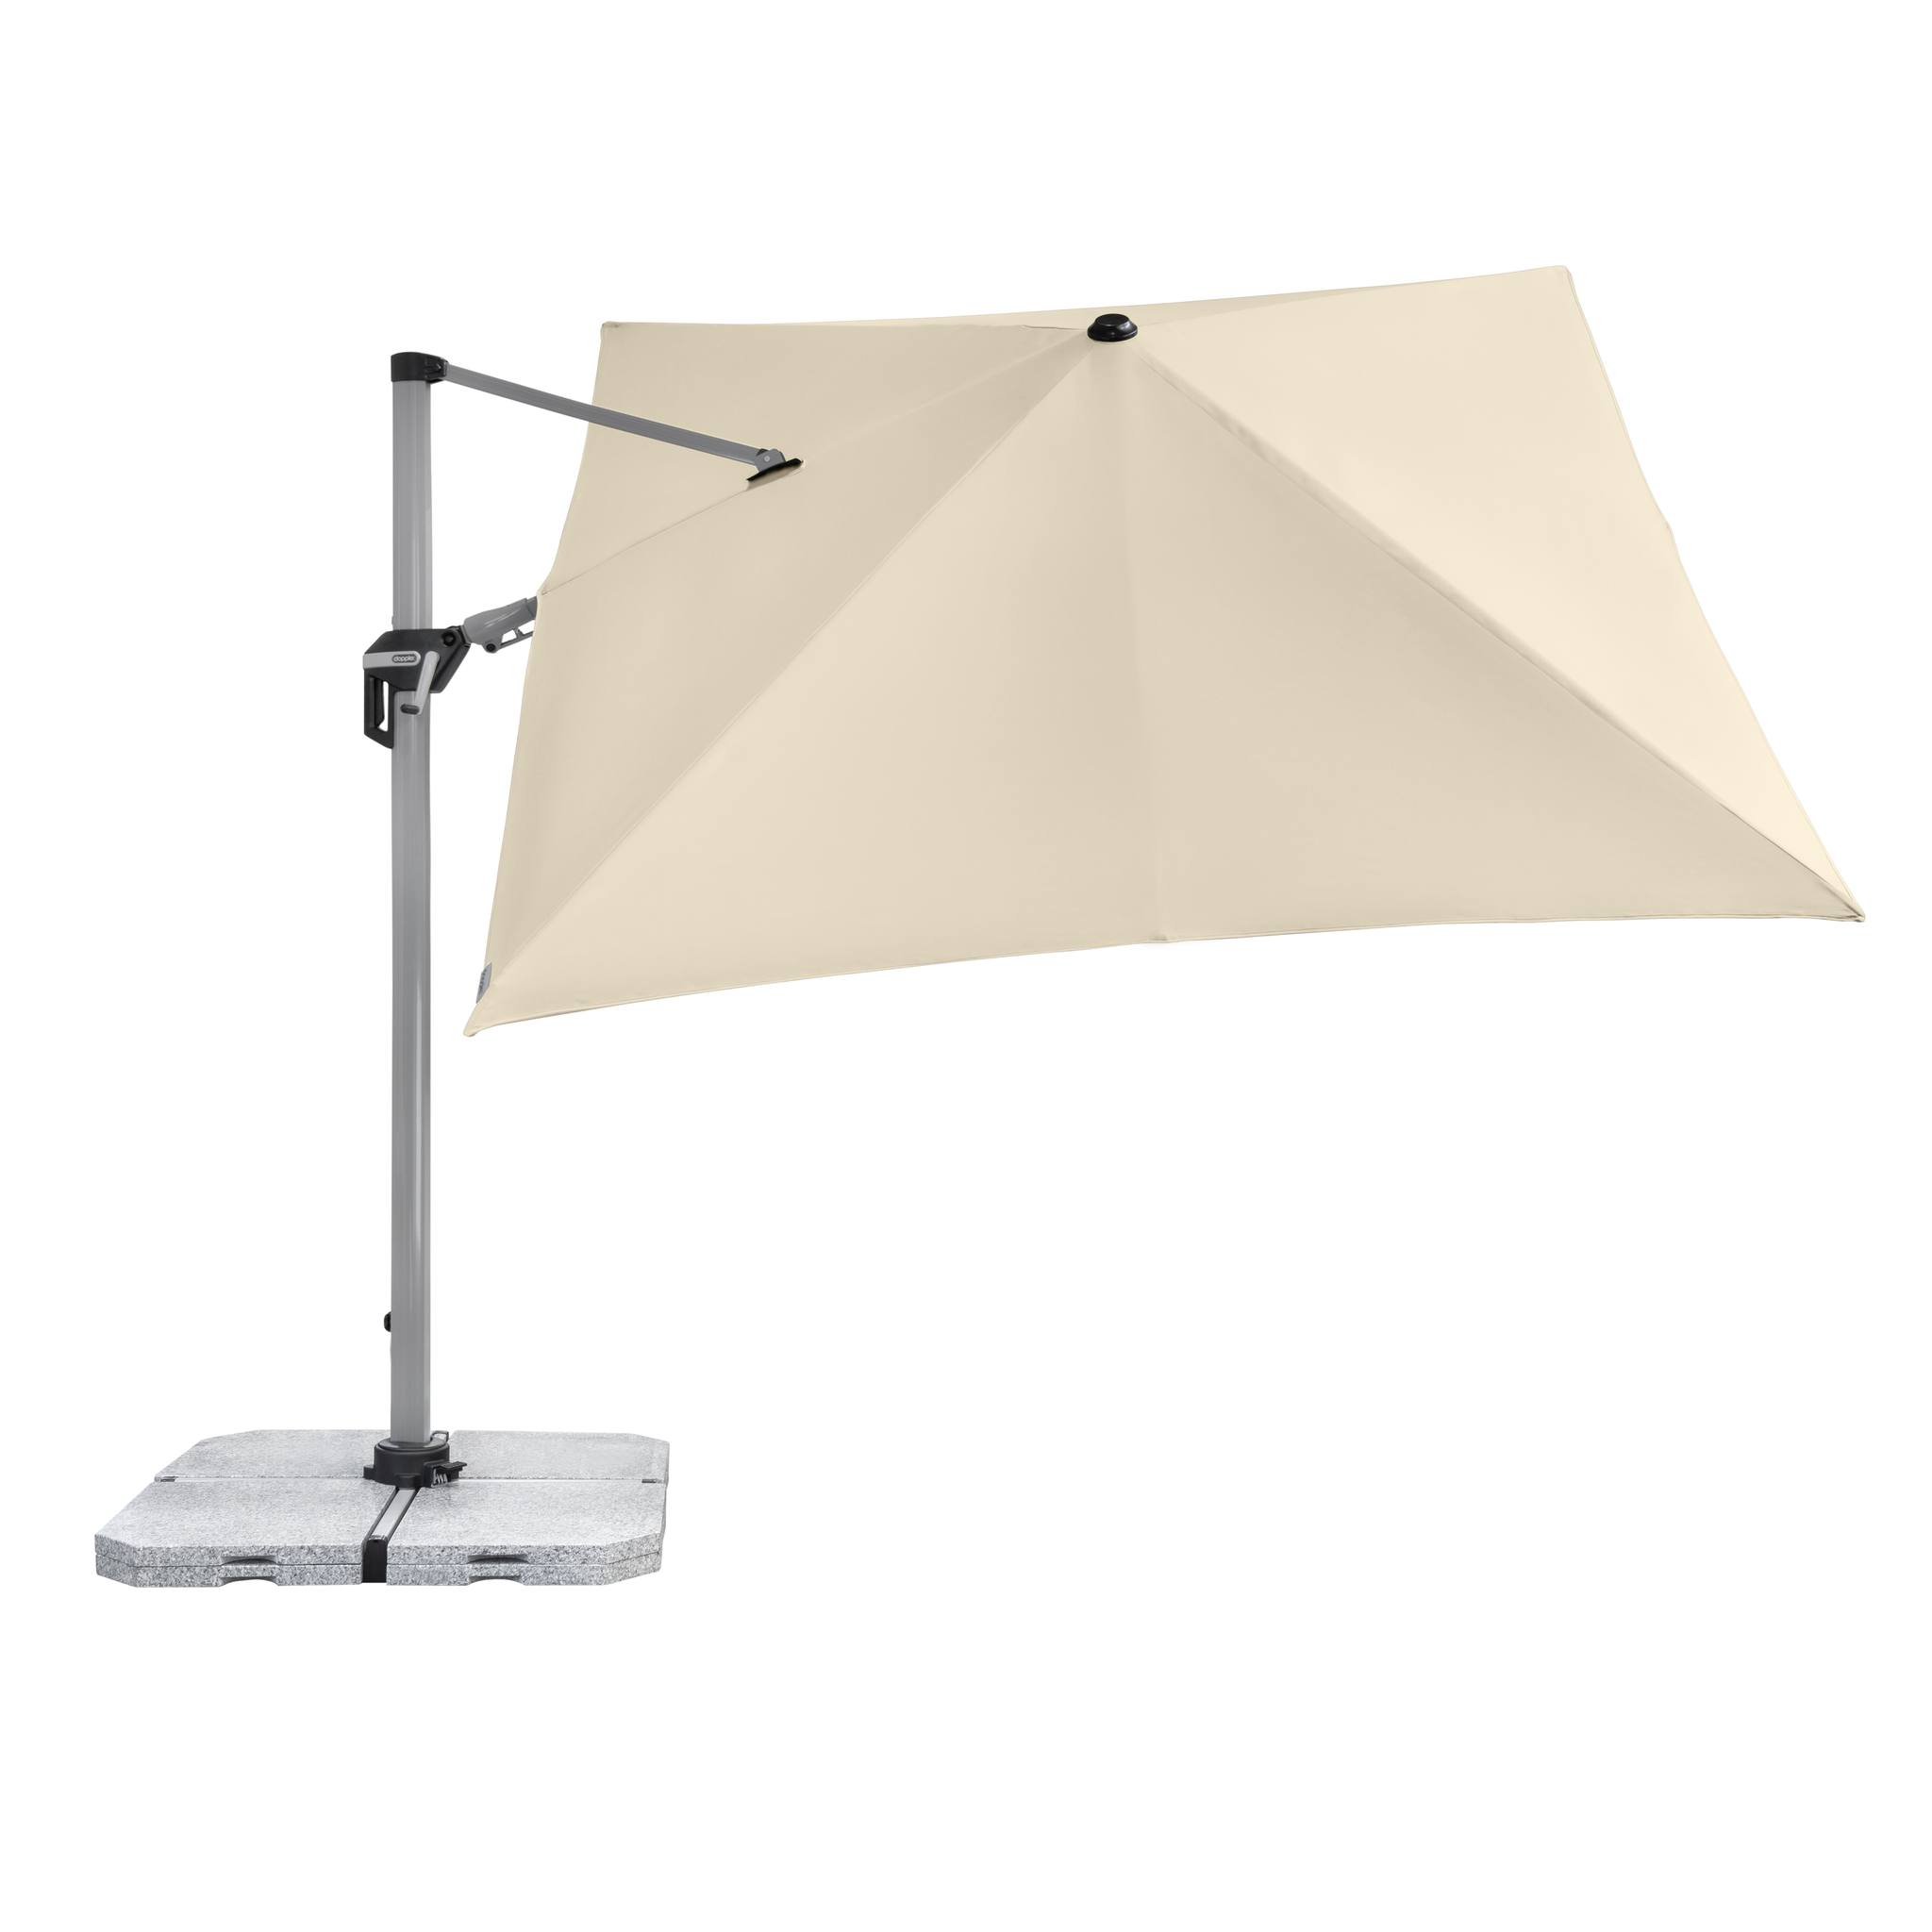 Doppler Active 360 x 260cm cantilever parasol

Available colours: Ecru, Fresh Green and Greige

Discover this multi-func... » Outdoor Furniture Fuengirola, Costa Del Sol, Spain